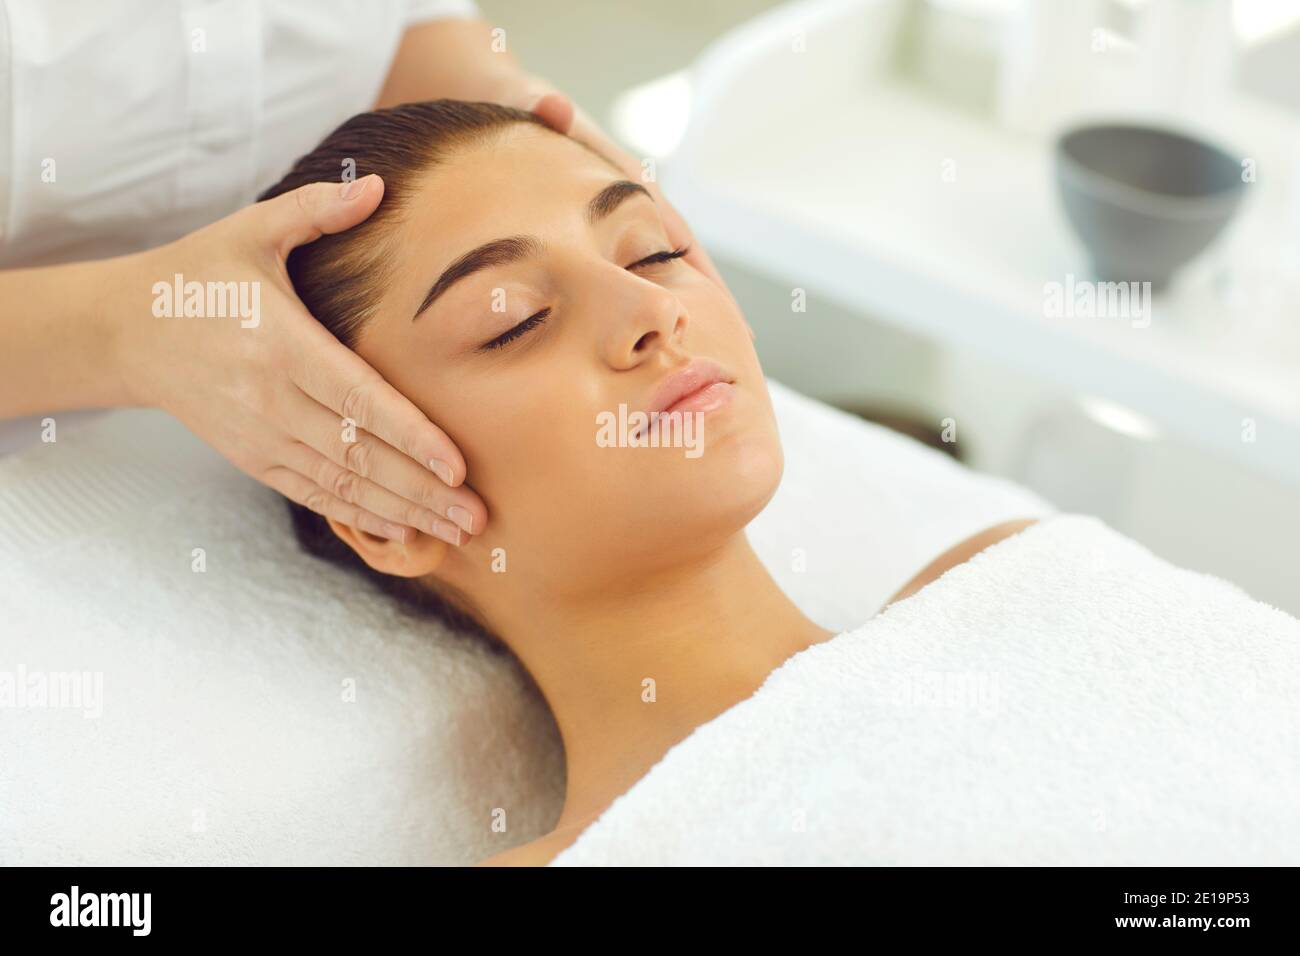 Hands of cosmetologist touching head and checking skin or making facial massage for young woman Stock Photo